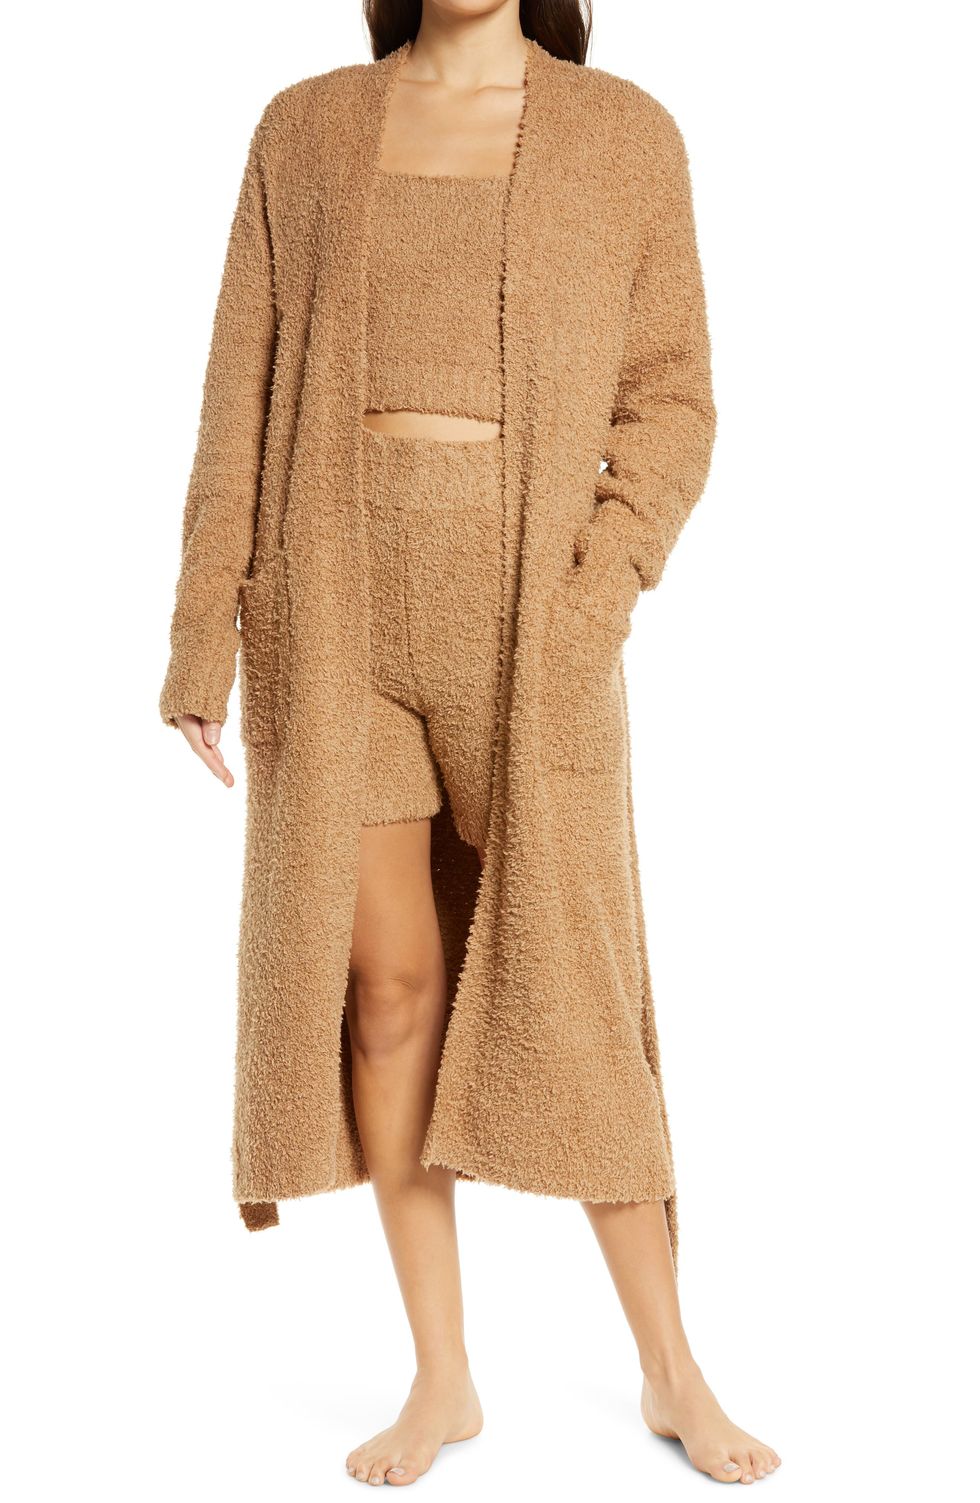 20 Best Bath Robes For Women To Lounge, Per Stylists And Reviews